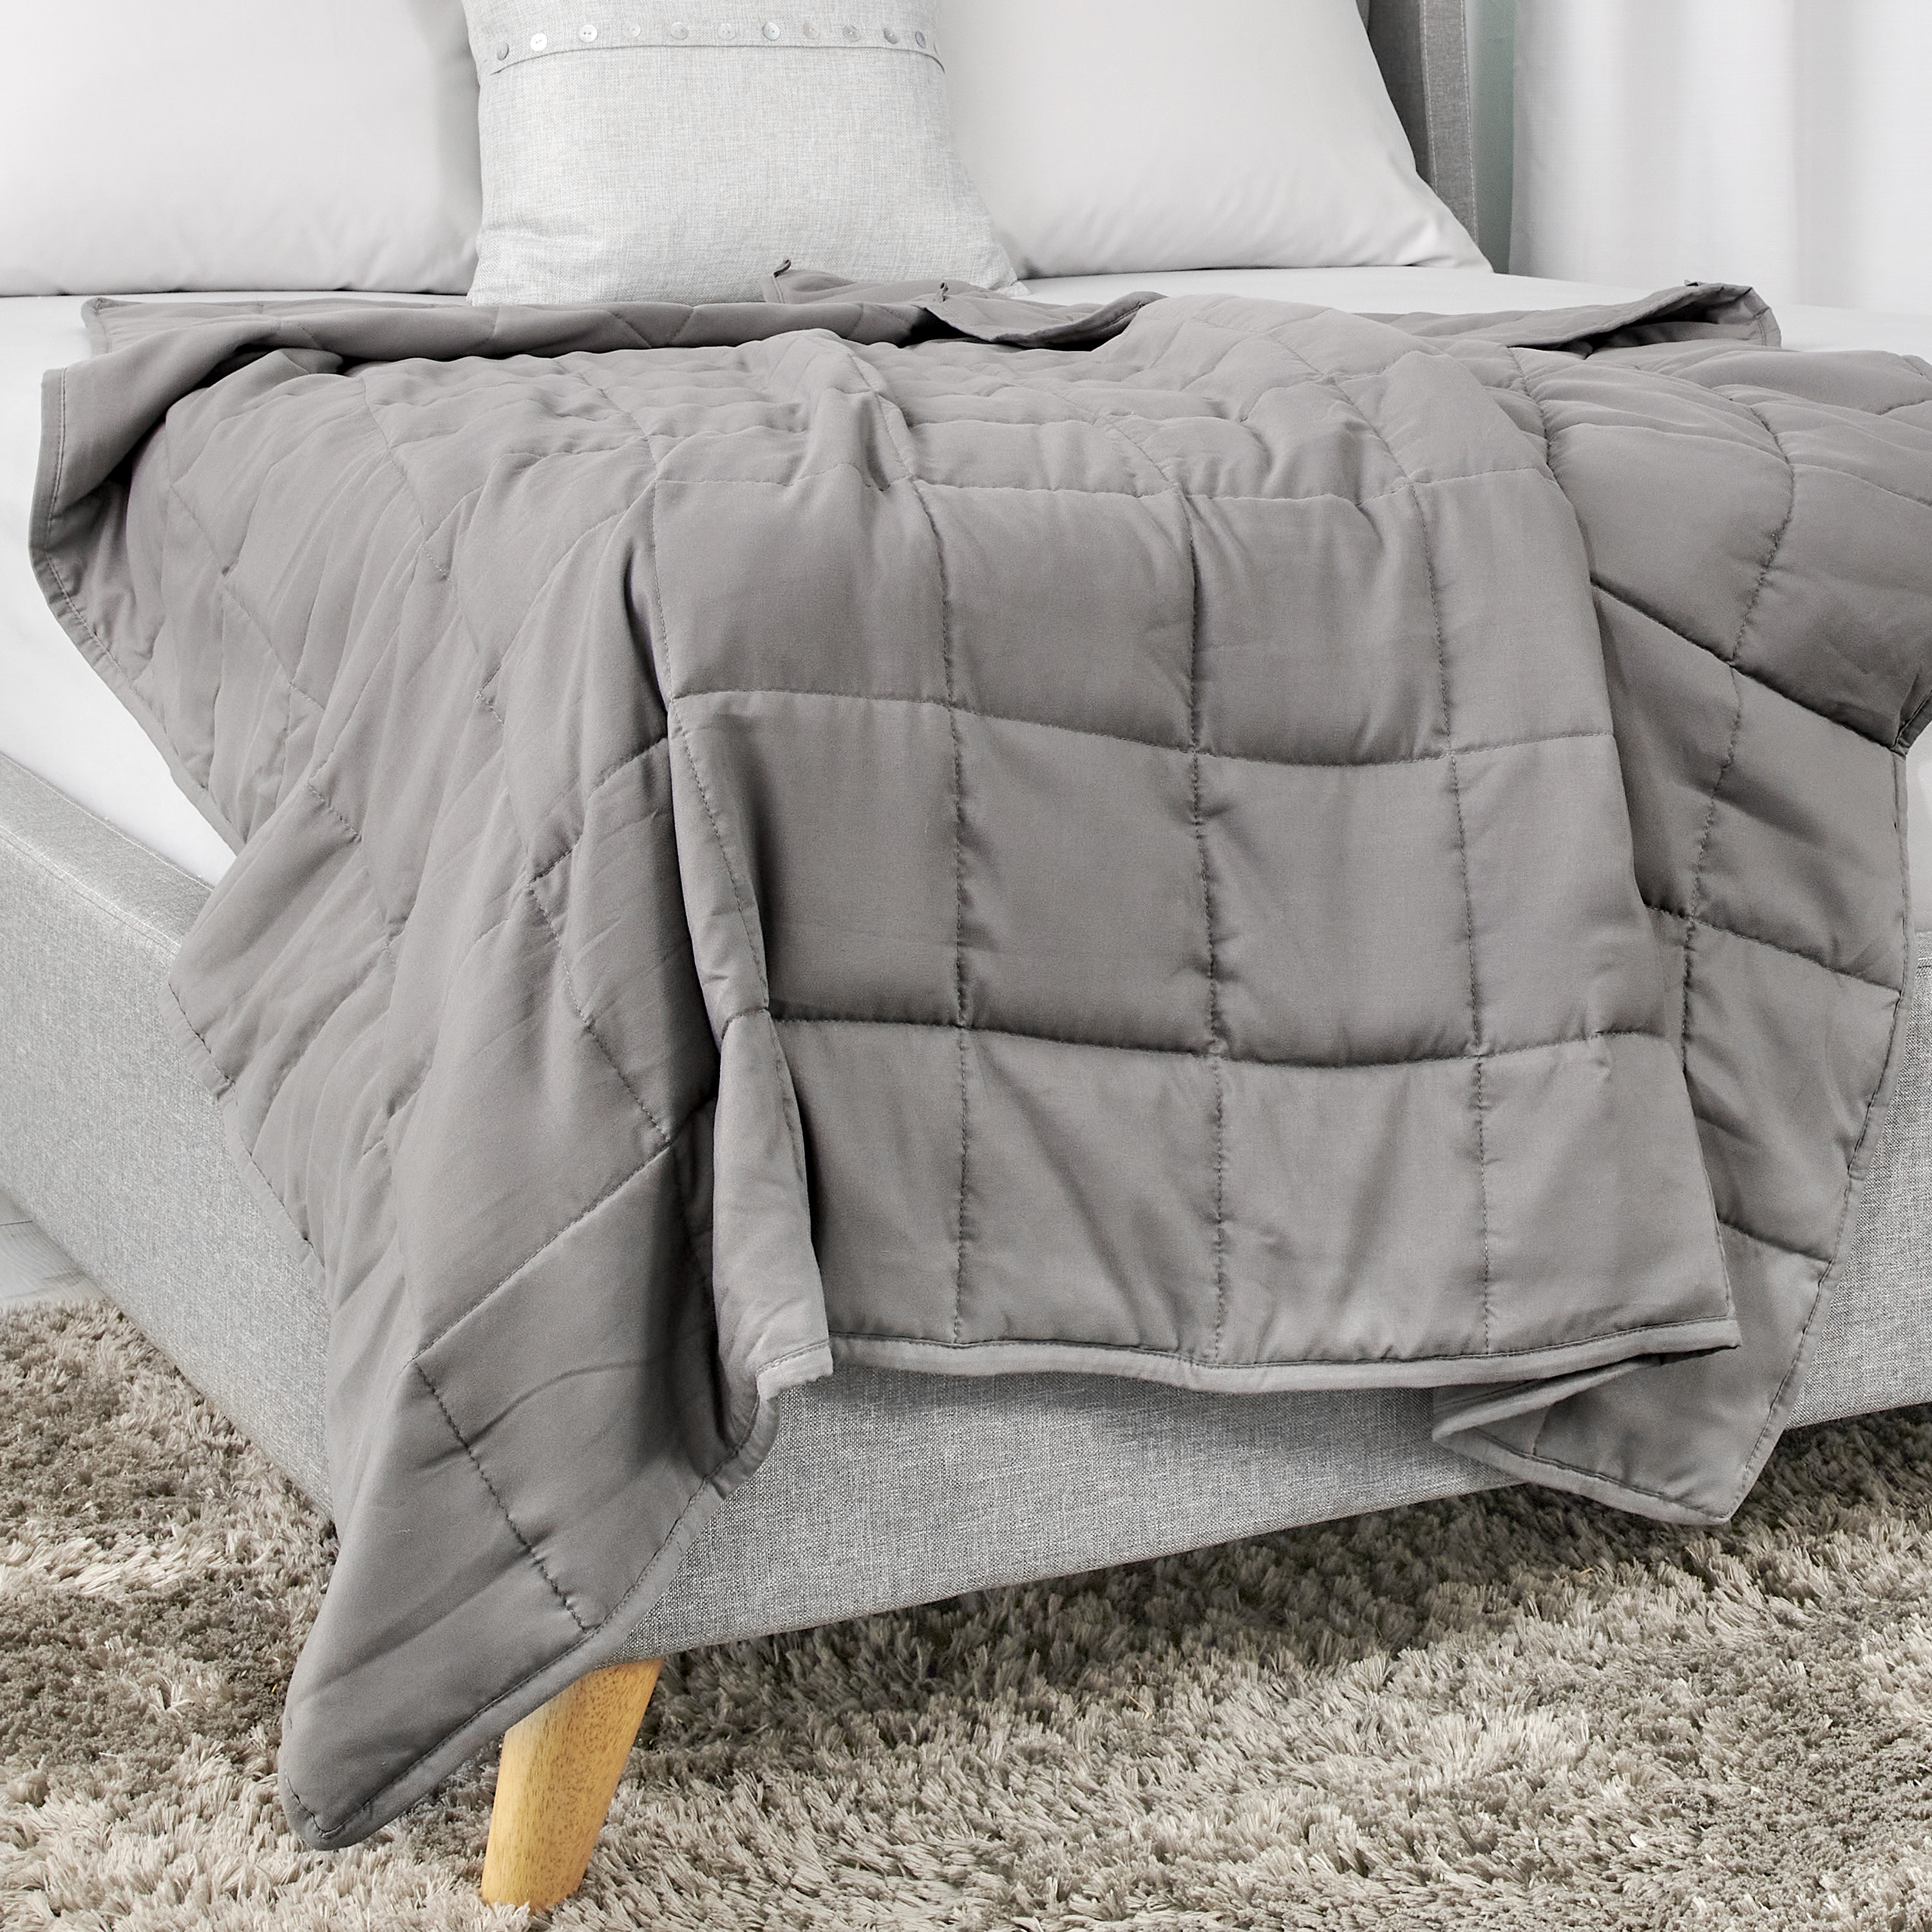 Tranquility Antimicrobial Quilted Weighted Blanket, Gray, 12LB - image 1 of 6